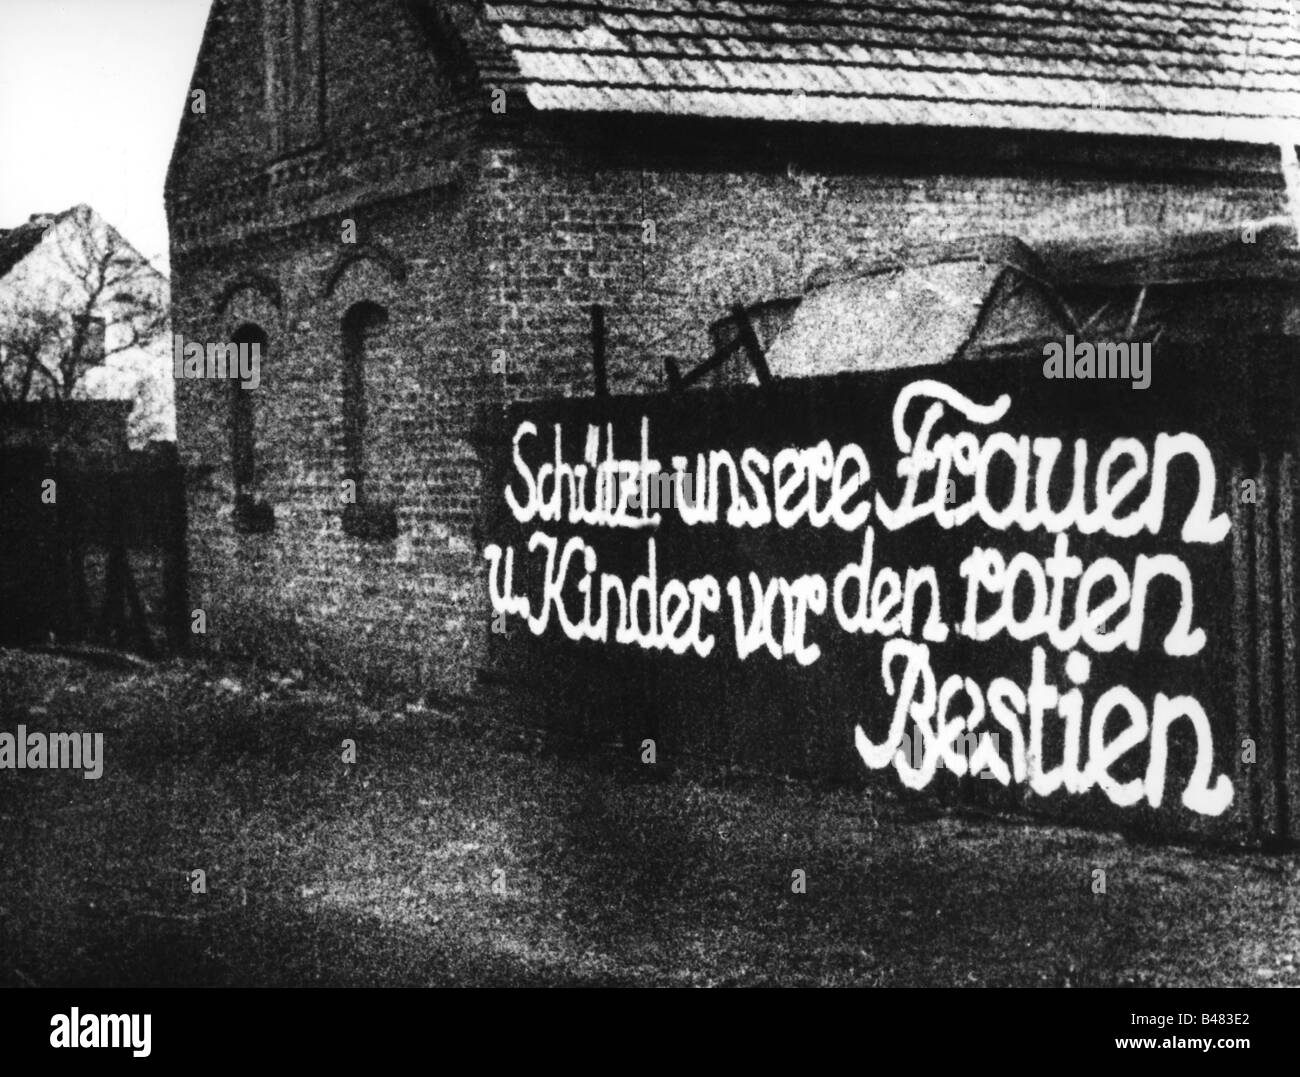 events, Second World War / WWII, Germany, slogan 'Protect our women and children against the red beasts', Berlin, 1945, Stock Photo